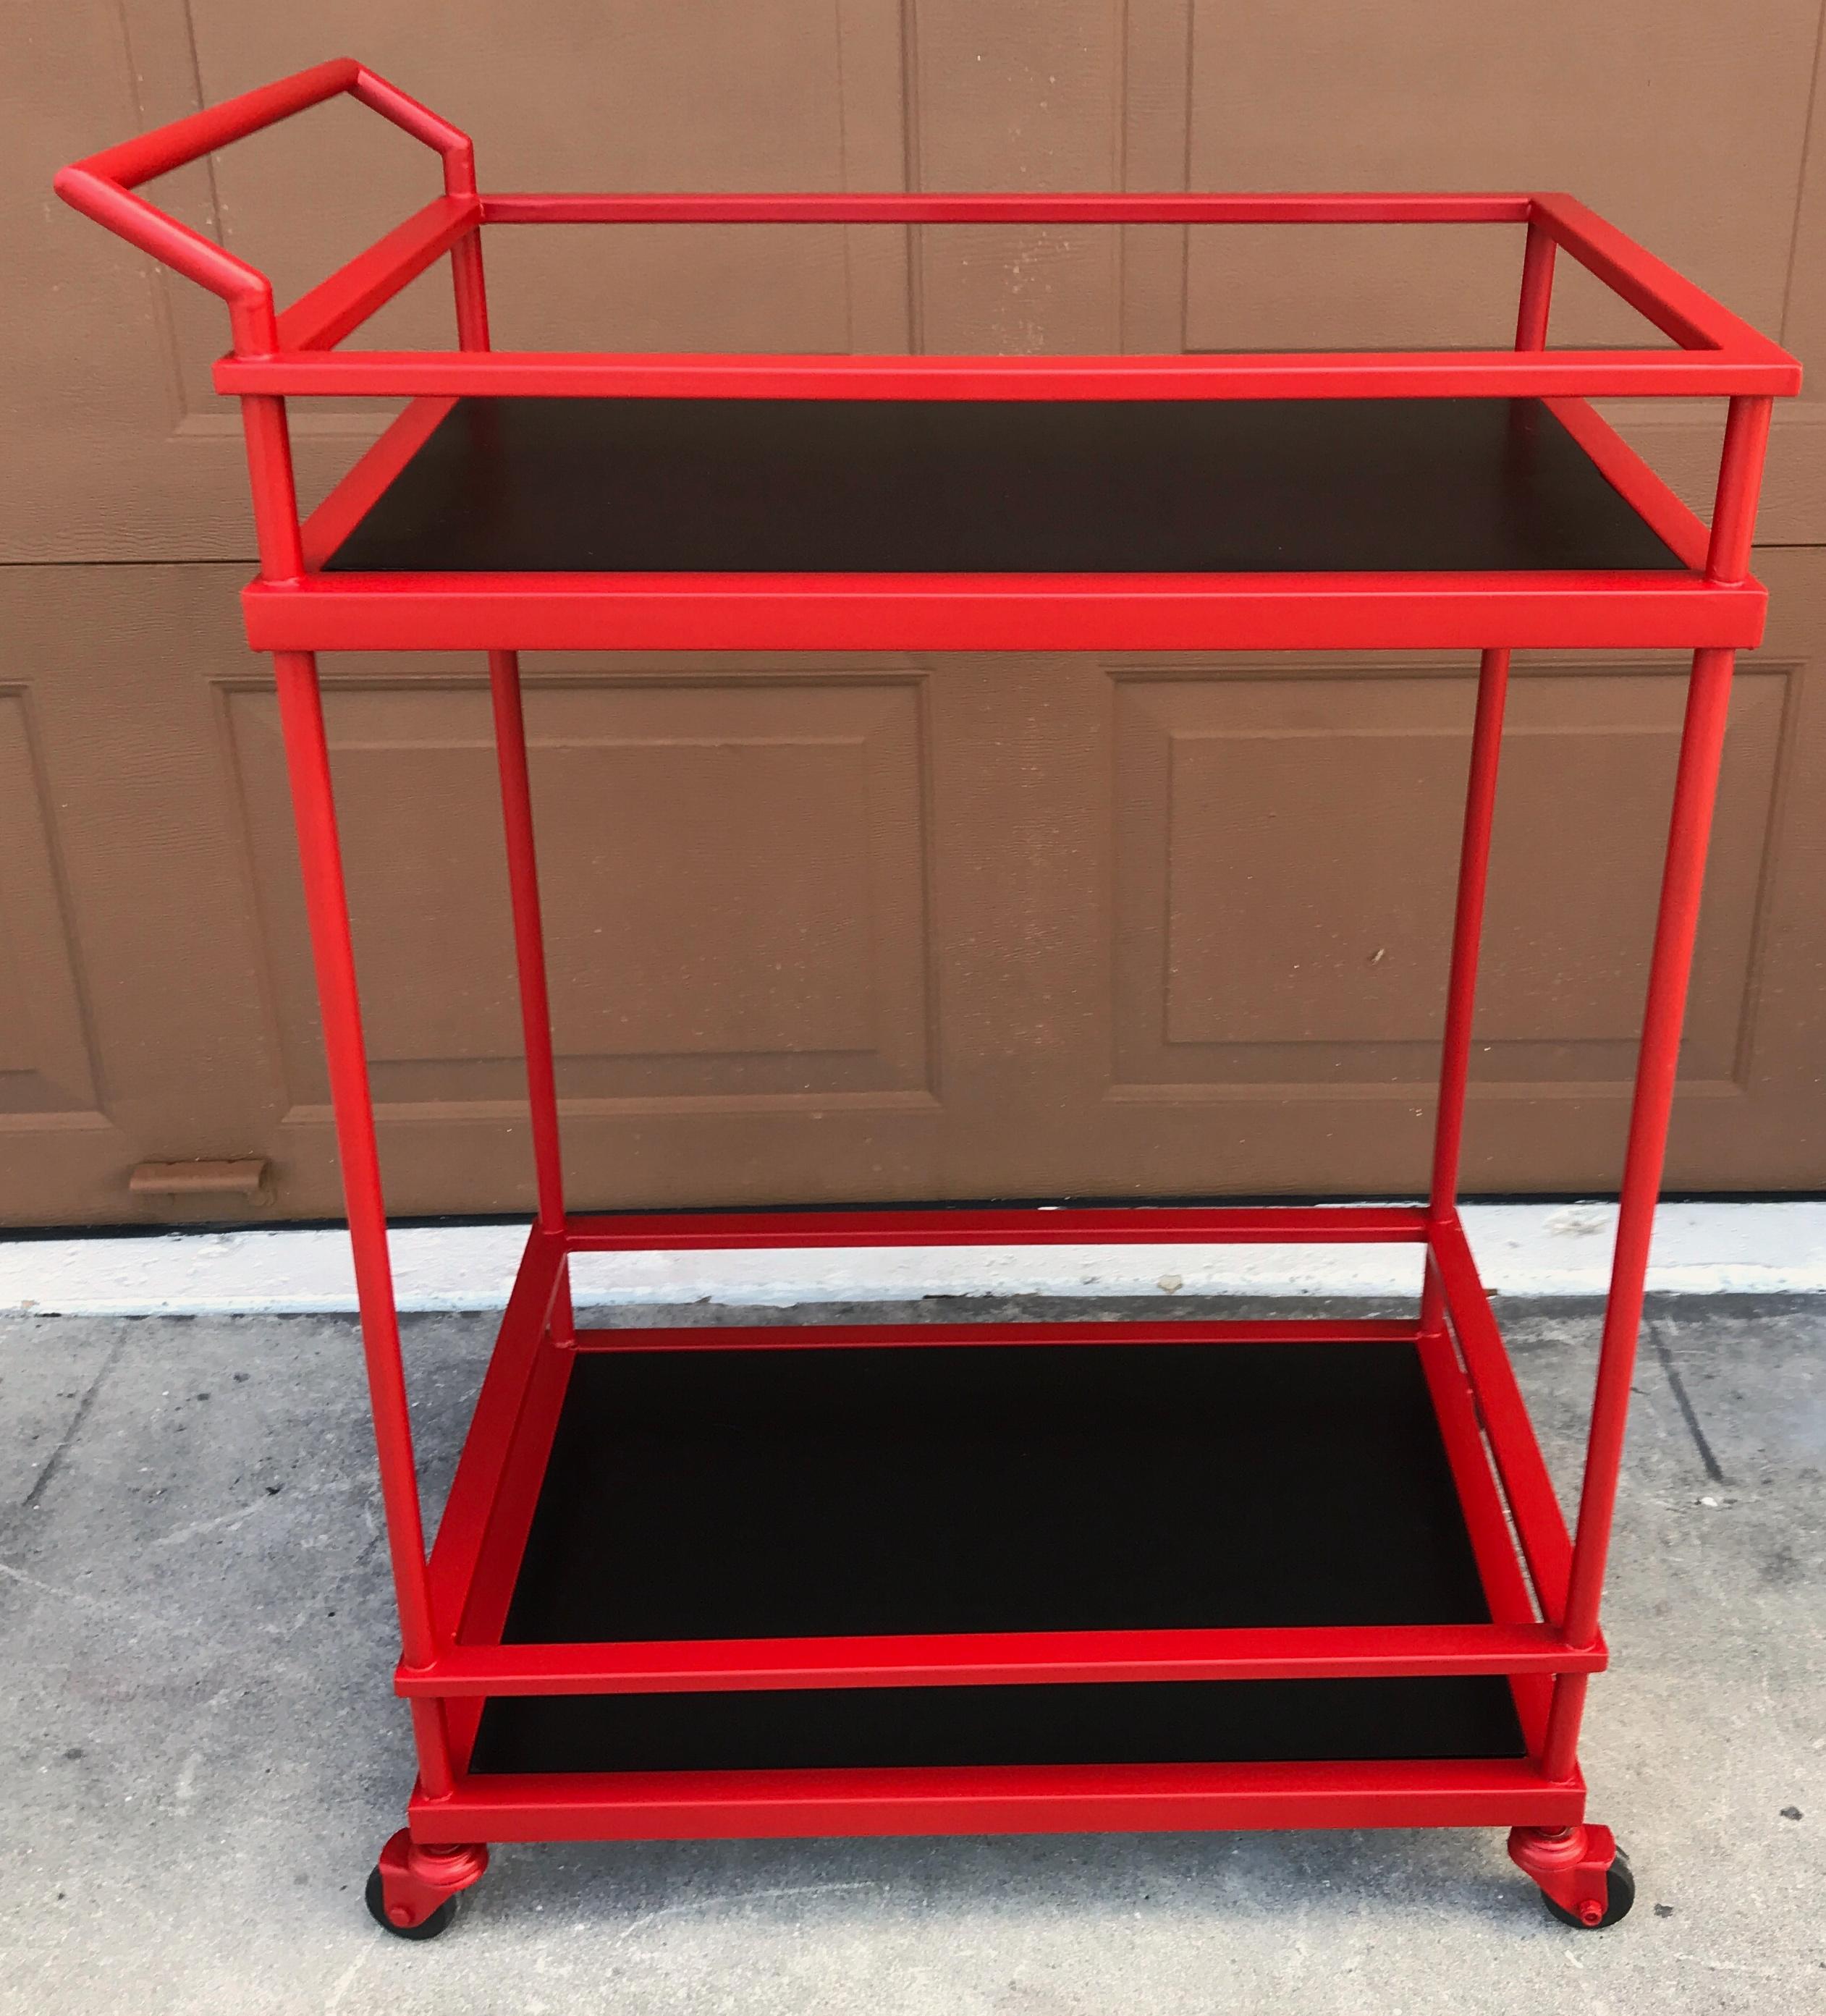 French modern red enameled bar cart, with two galleried tiers, and inset black lacquered panels. Raised on four wheeled castors.